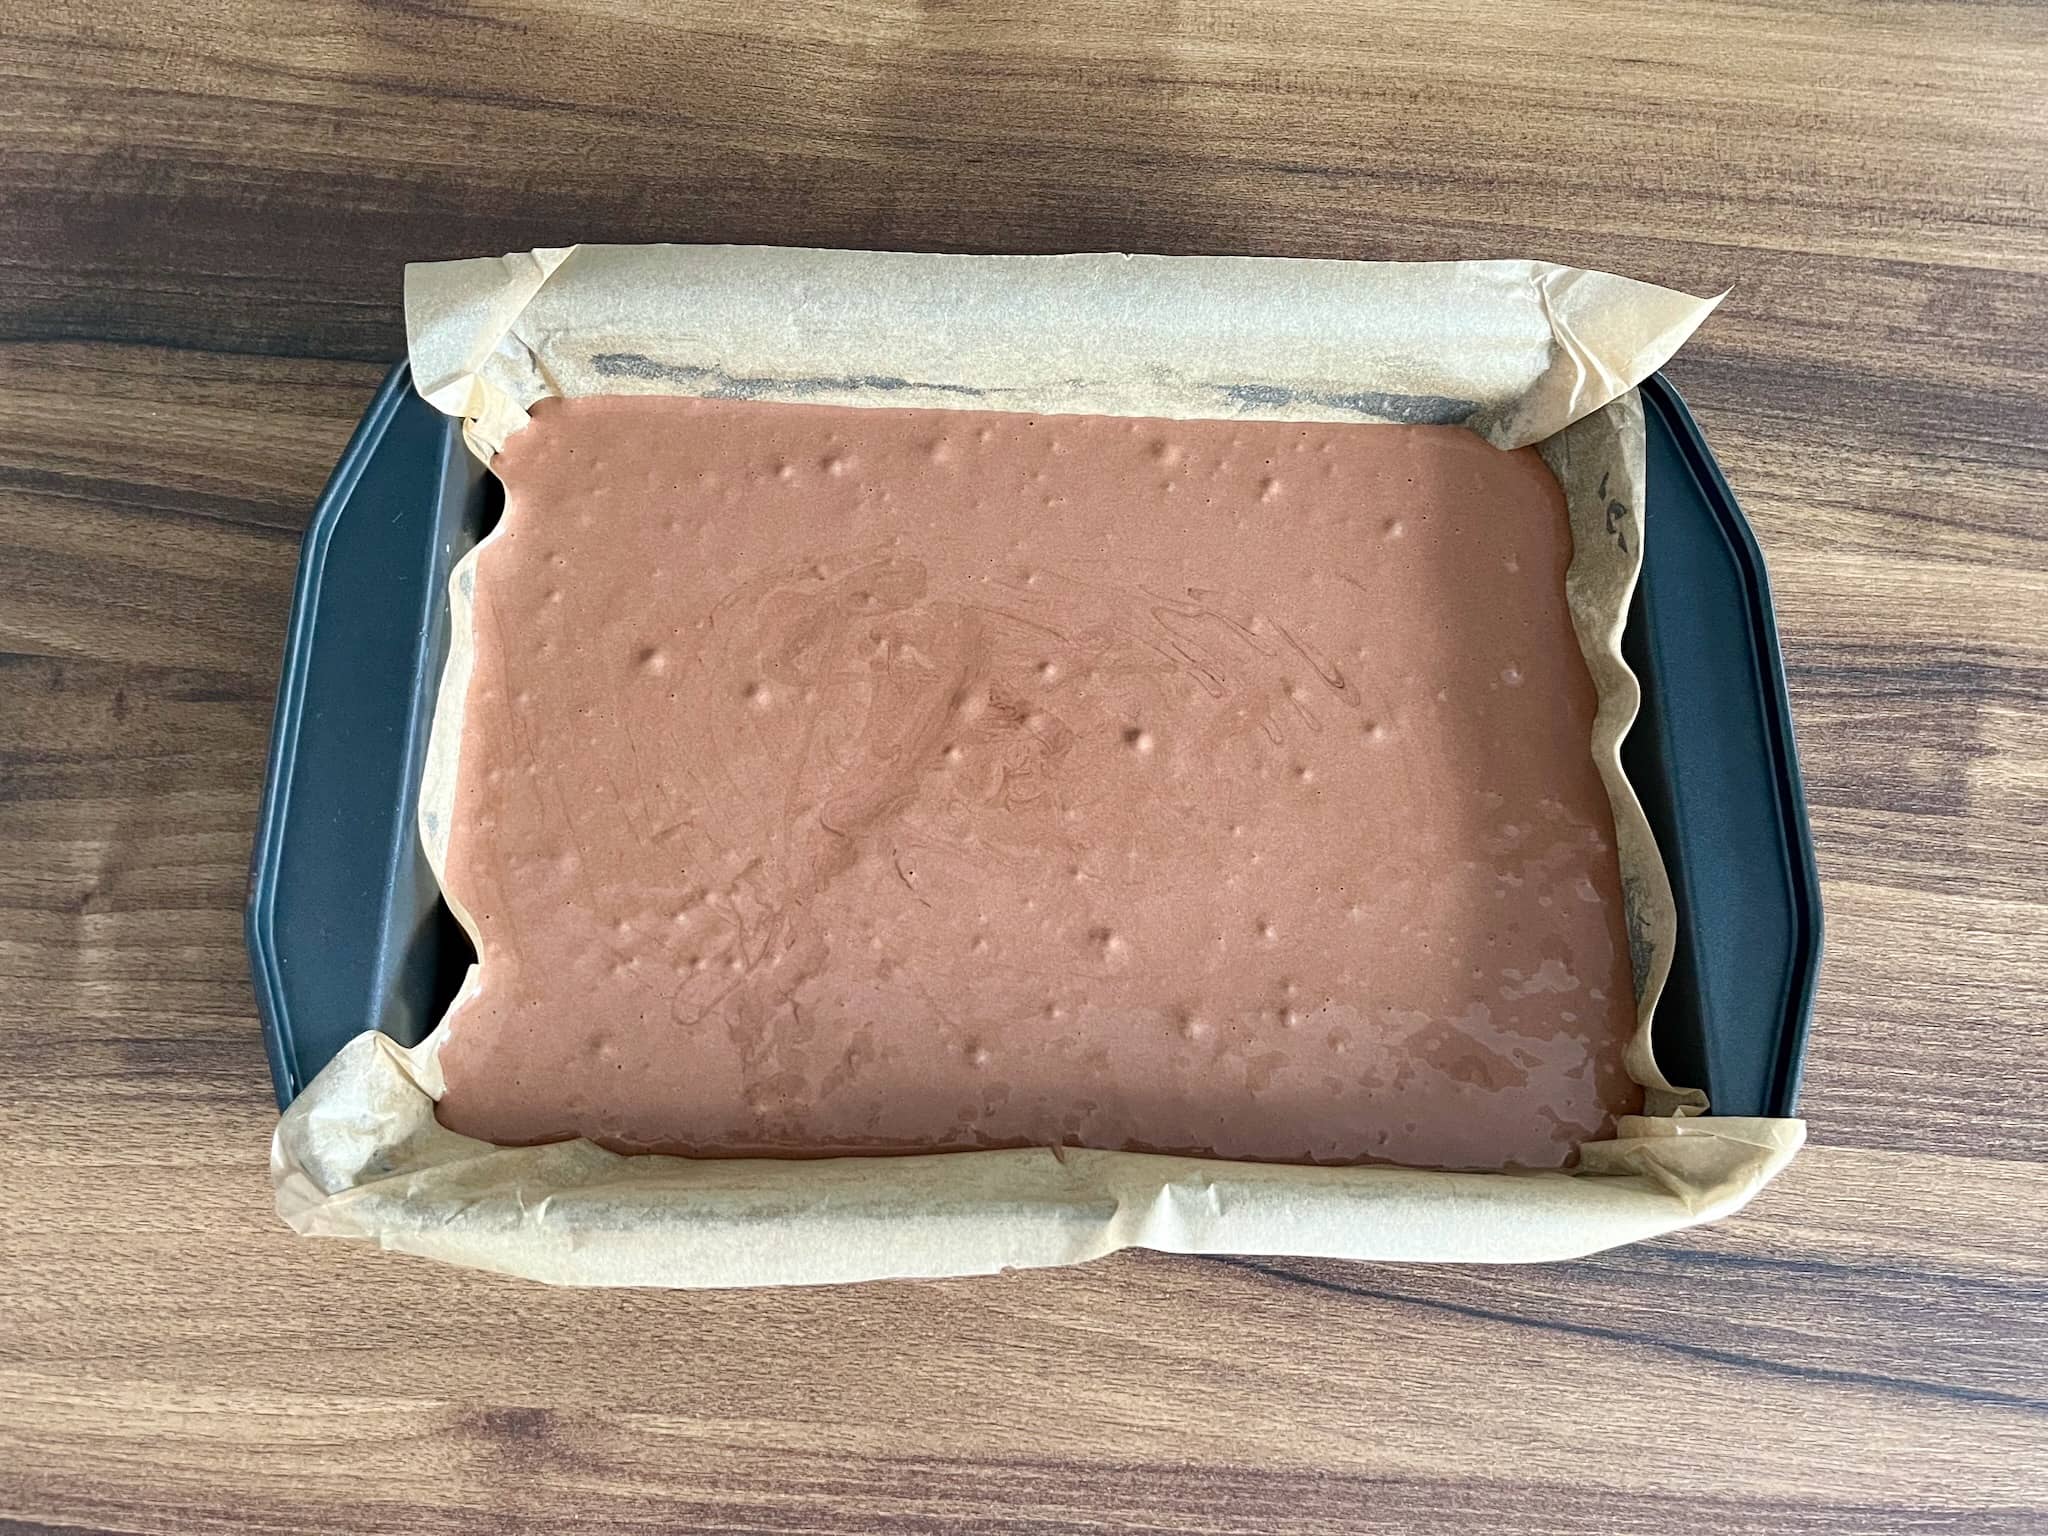 Cake dough in a lined baking tray before baking